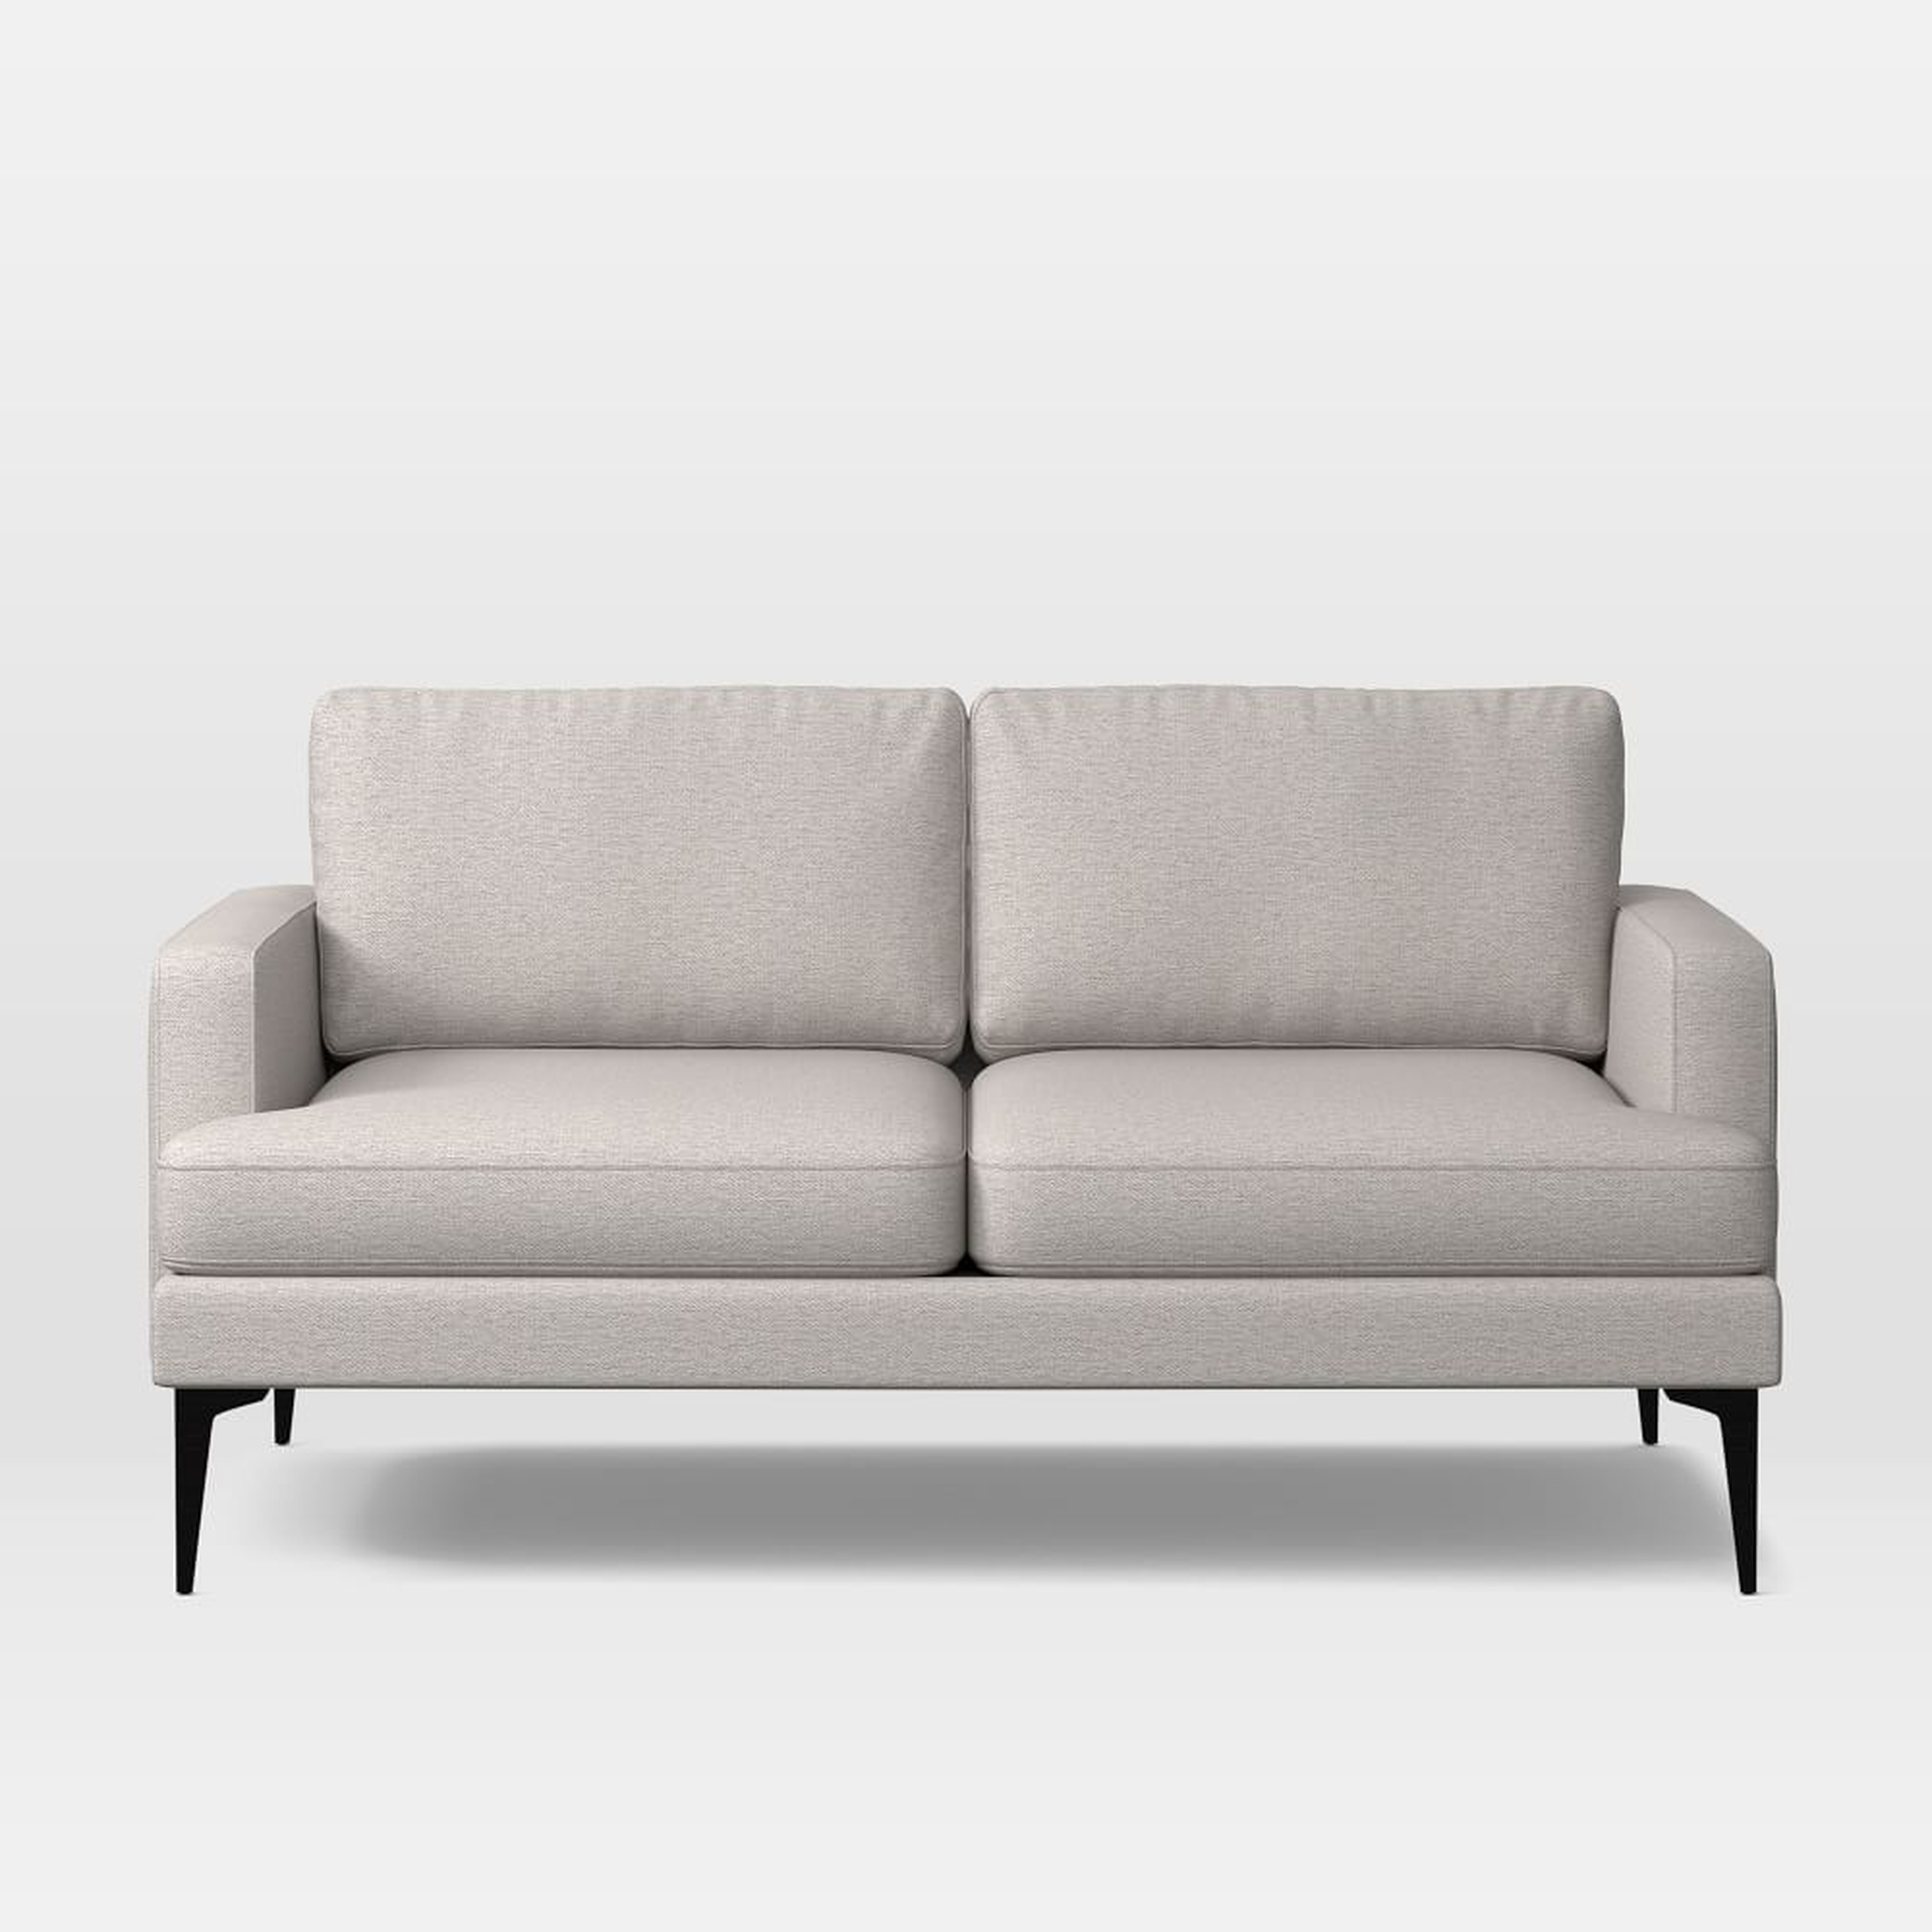 Andes Loveseat, Poly , Twill, Sand, Dark Pewter - West Elm